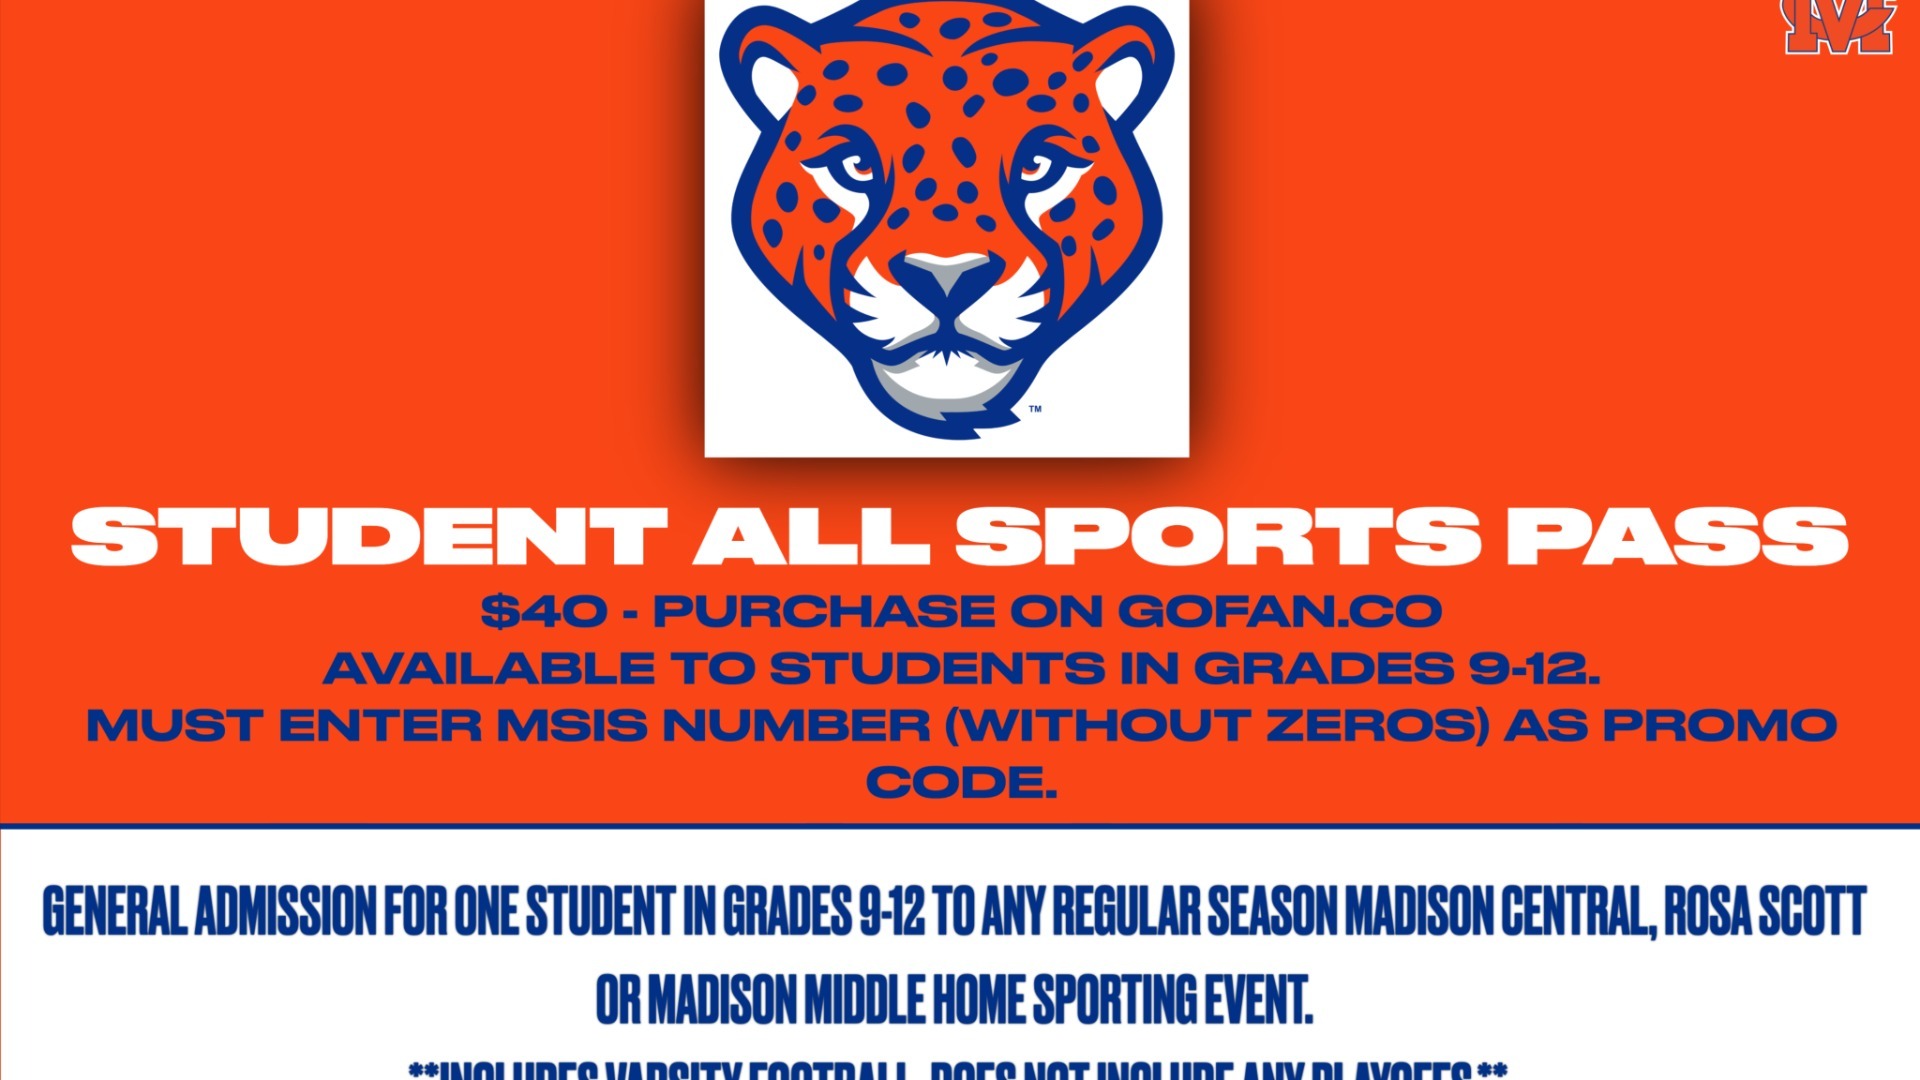 Madison CentralSlide 2 - All Sports Pass for Students in Grades 9-12